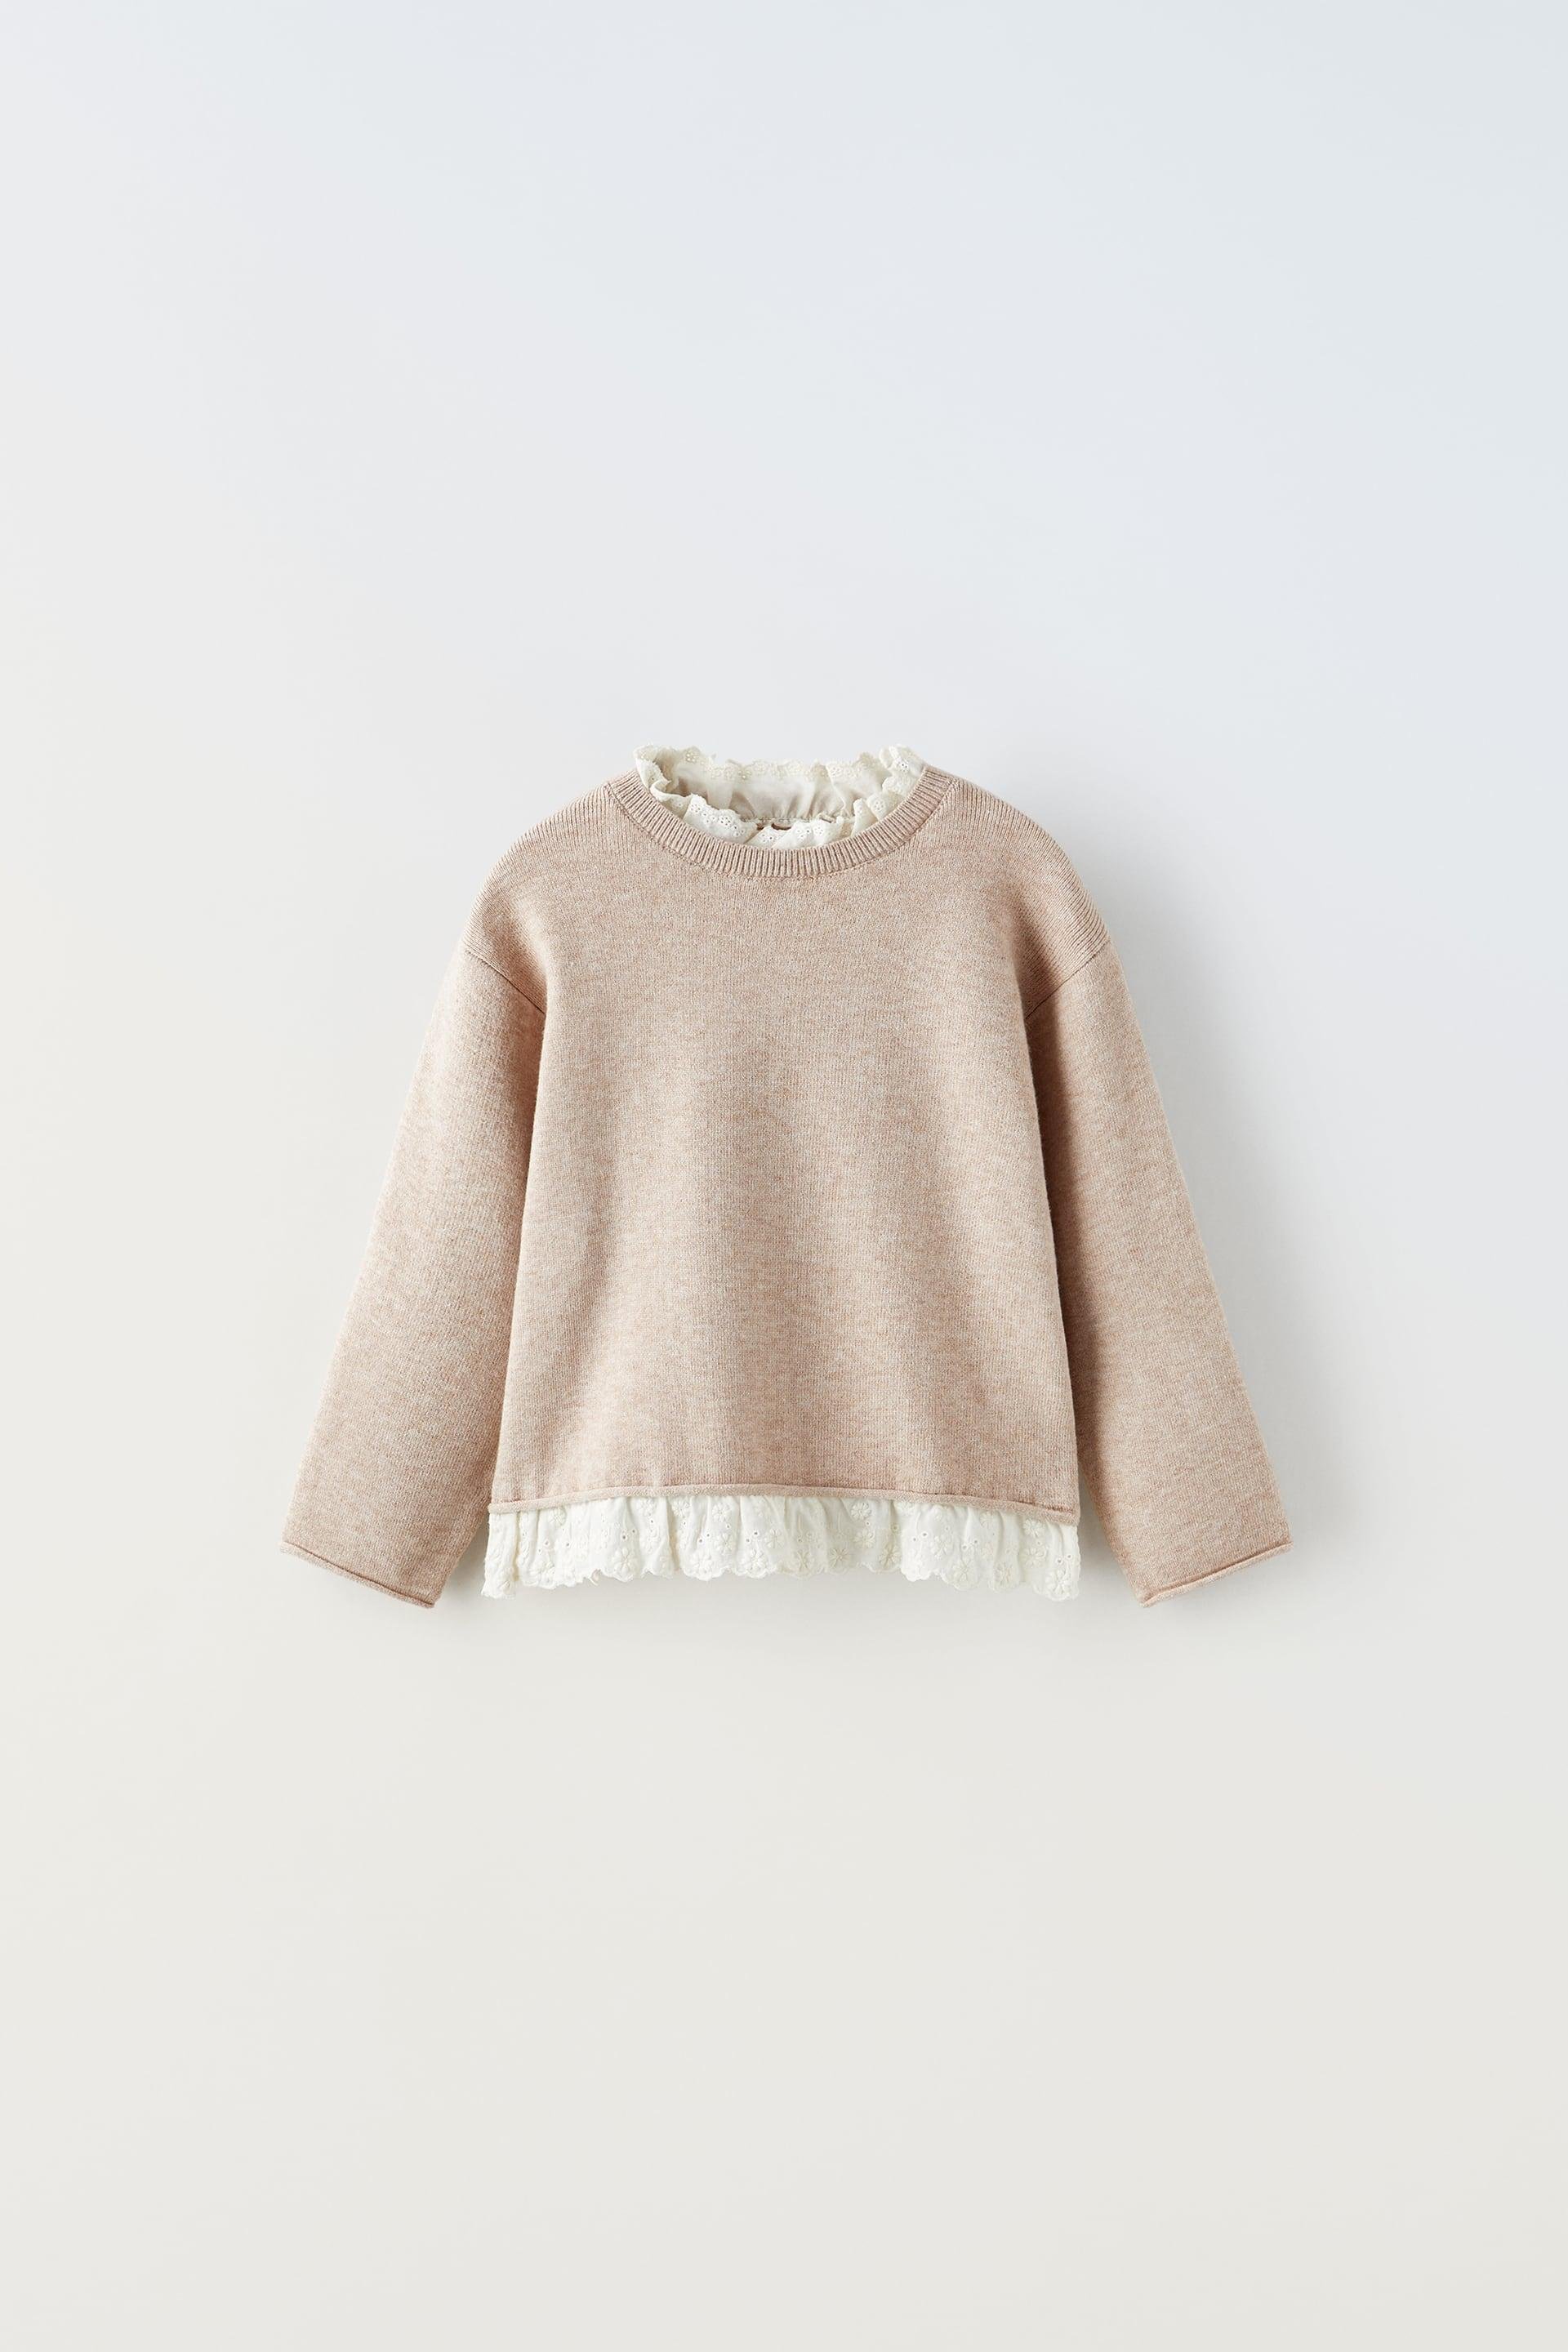 EMBROIDERED KNIT SWEATER by ZARA